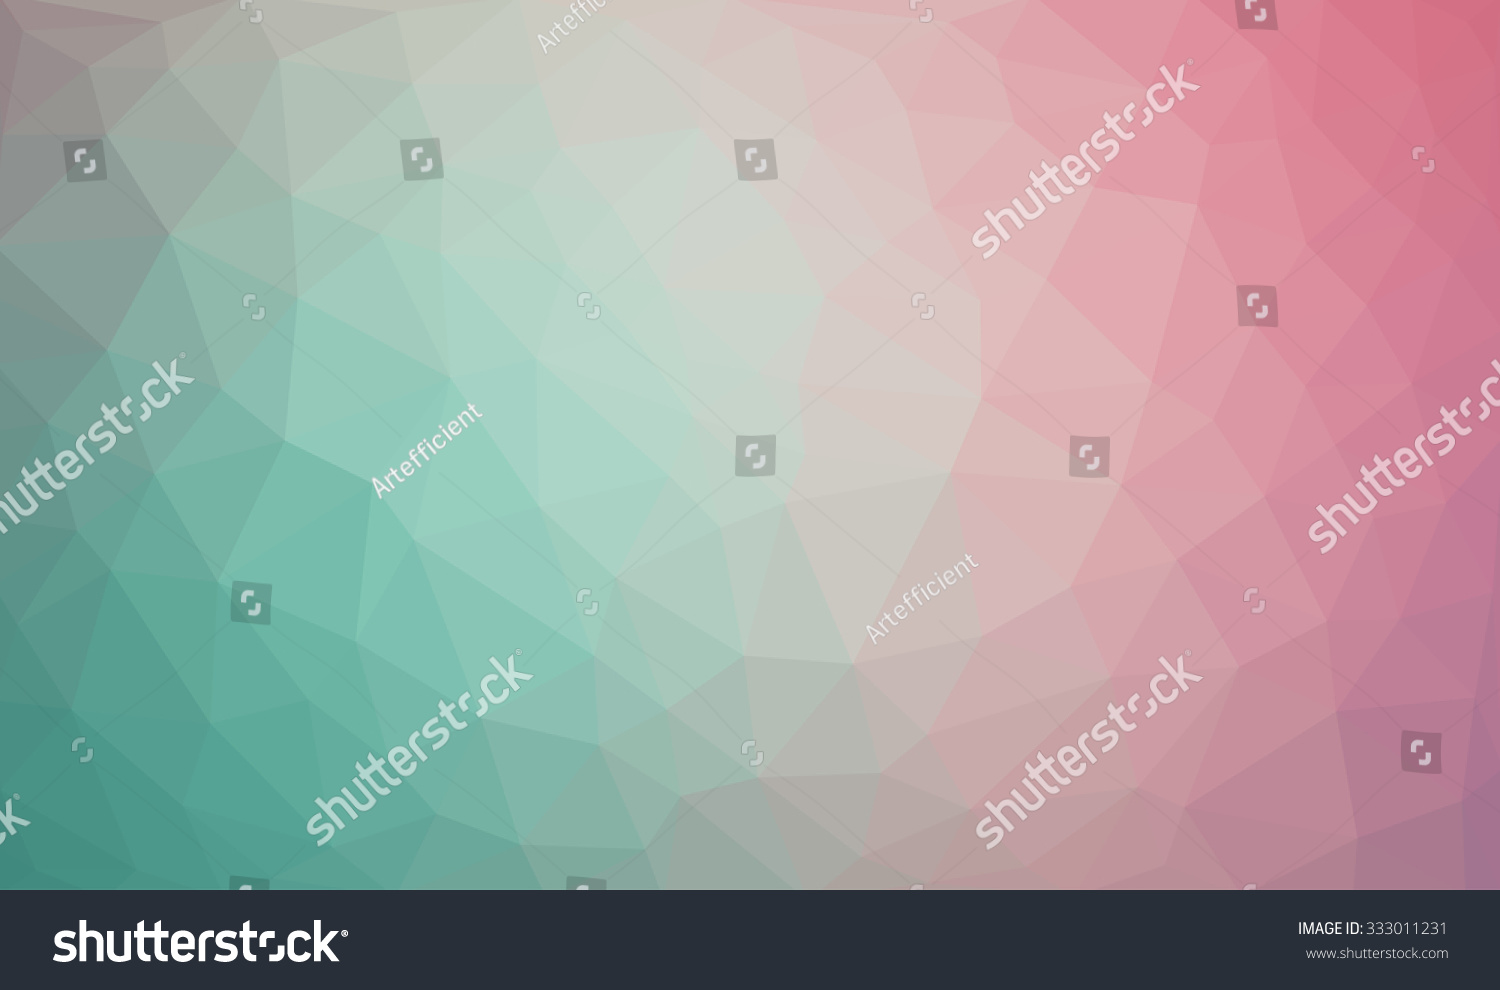 SVG of Low Poly Turquoise to Purple Pink Background with Radial Gradient. Faceted Geometric Texture. Abstract Triangle Vector Pattern. Trendy Hipster Style Background for Print or Web Design. svg